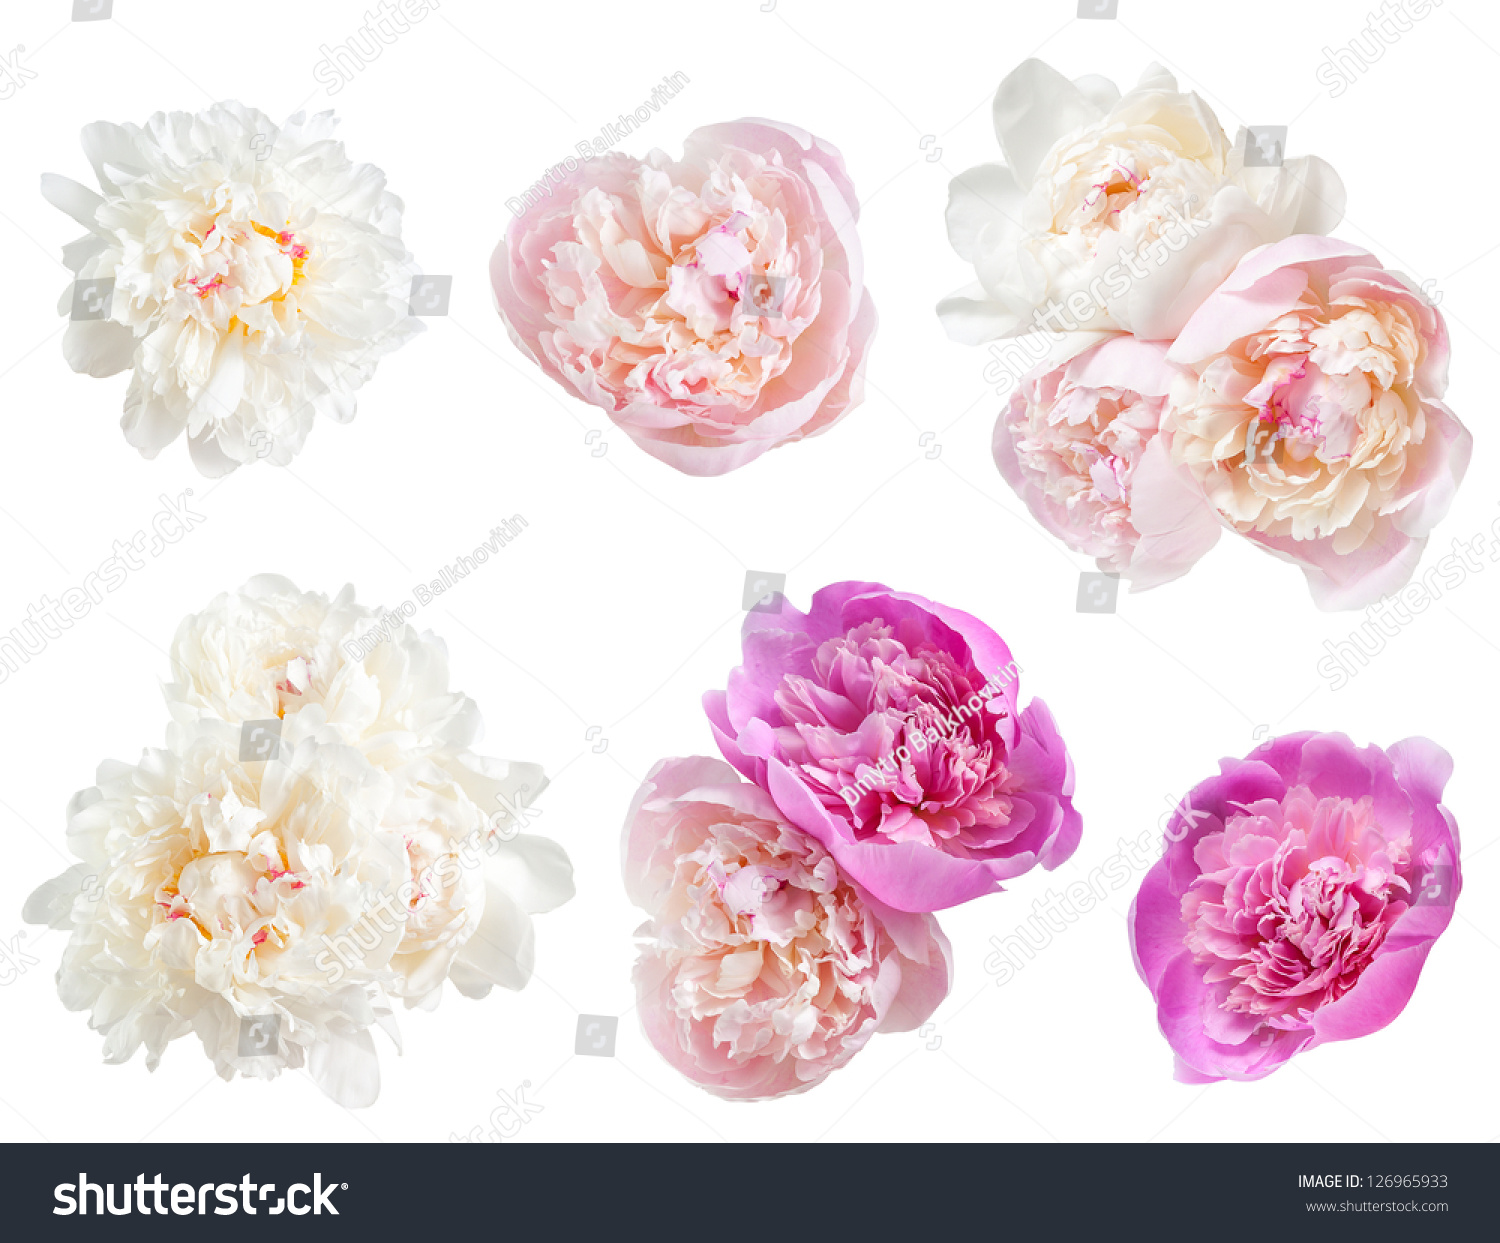 Set of peonies flower isolated on white background #126965933